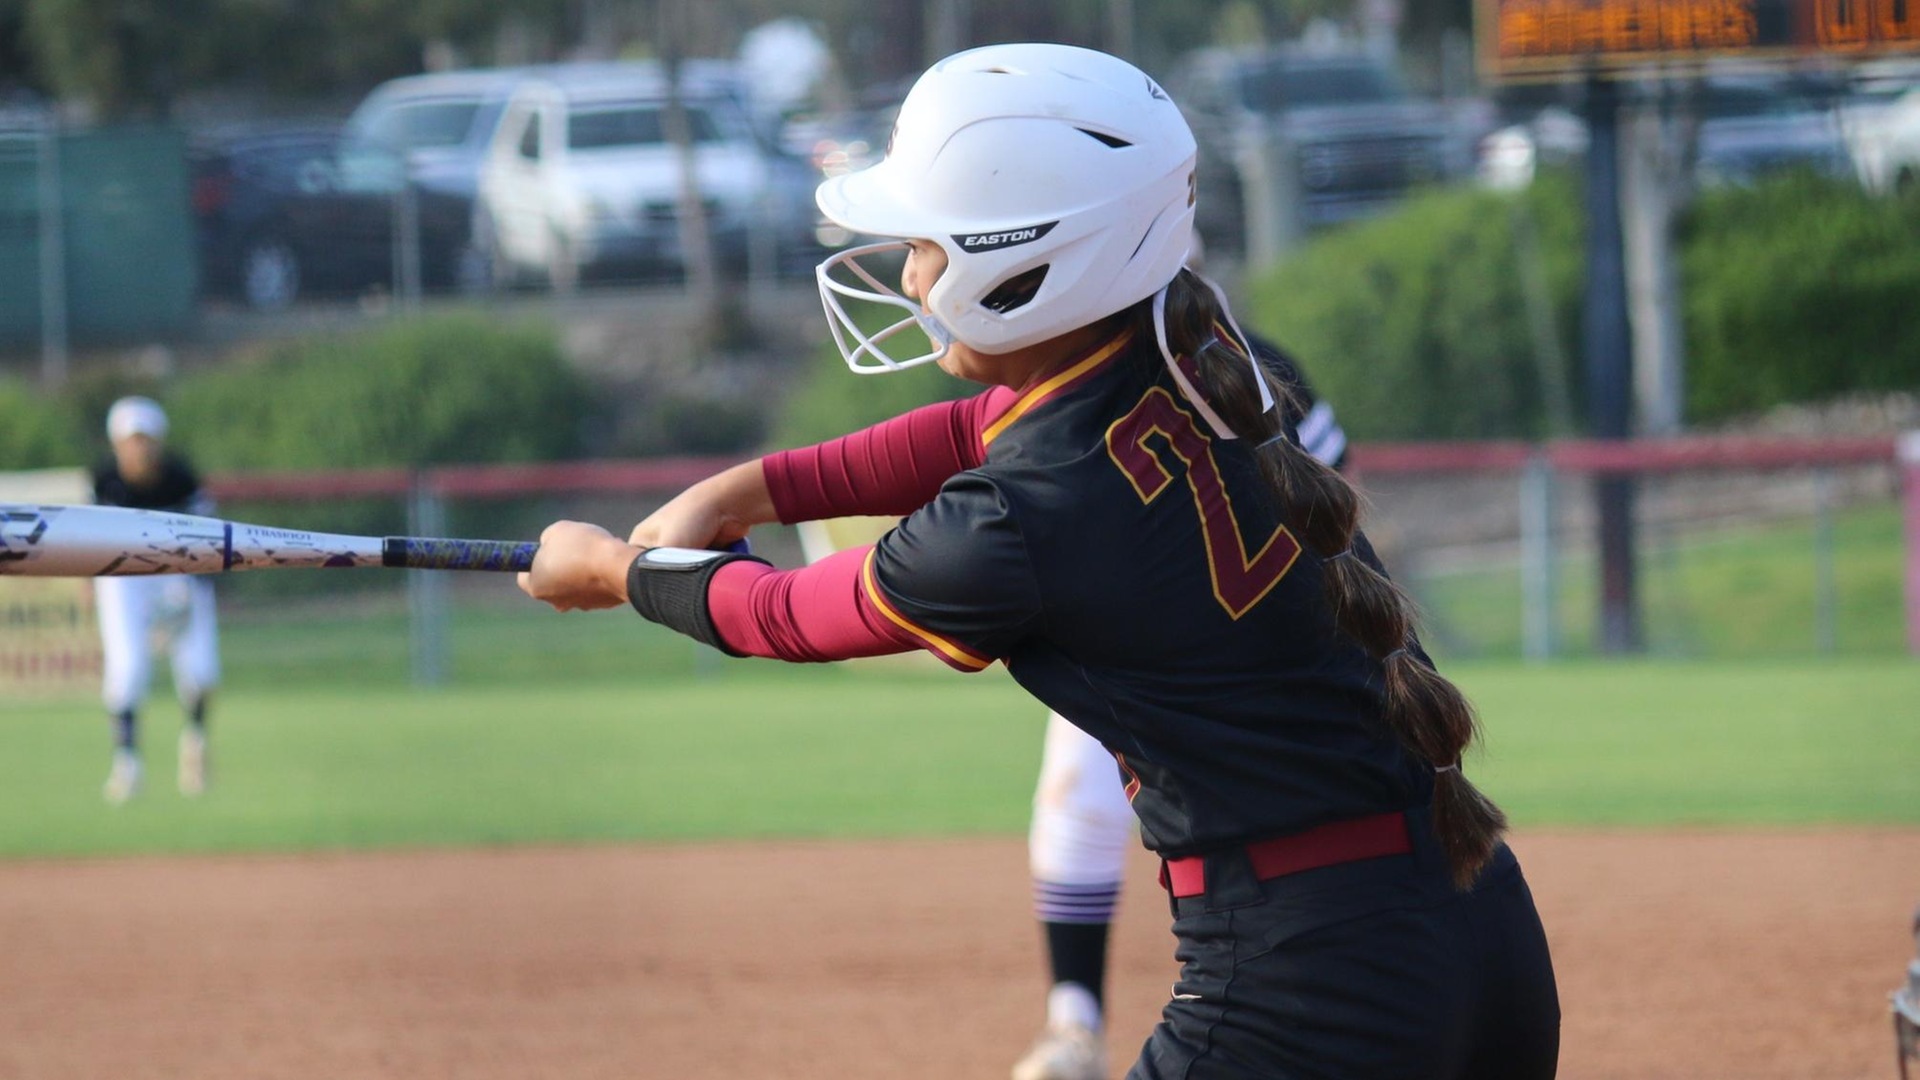 Emma Suh was 3-for-4 for the Athenas